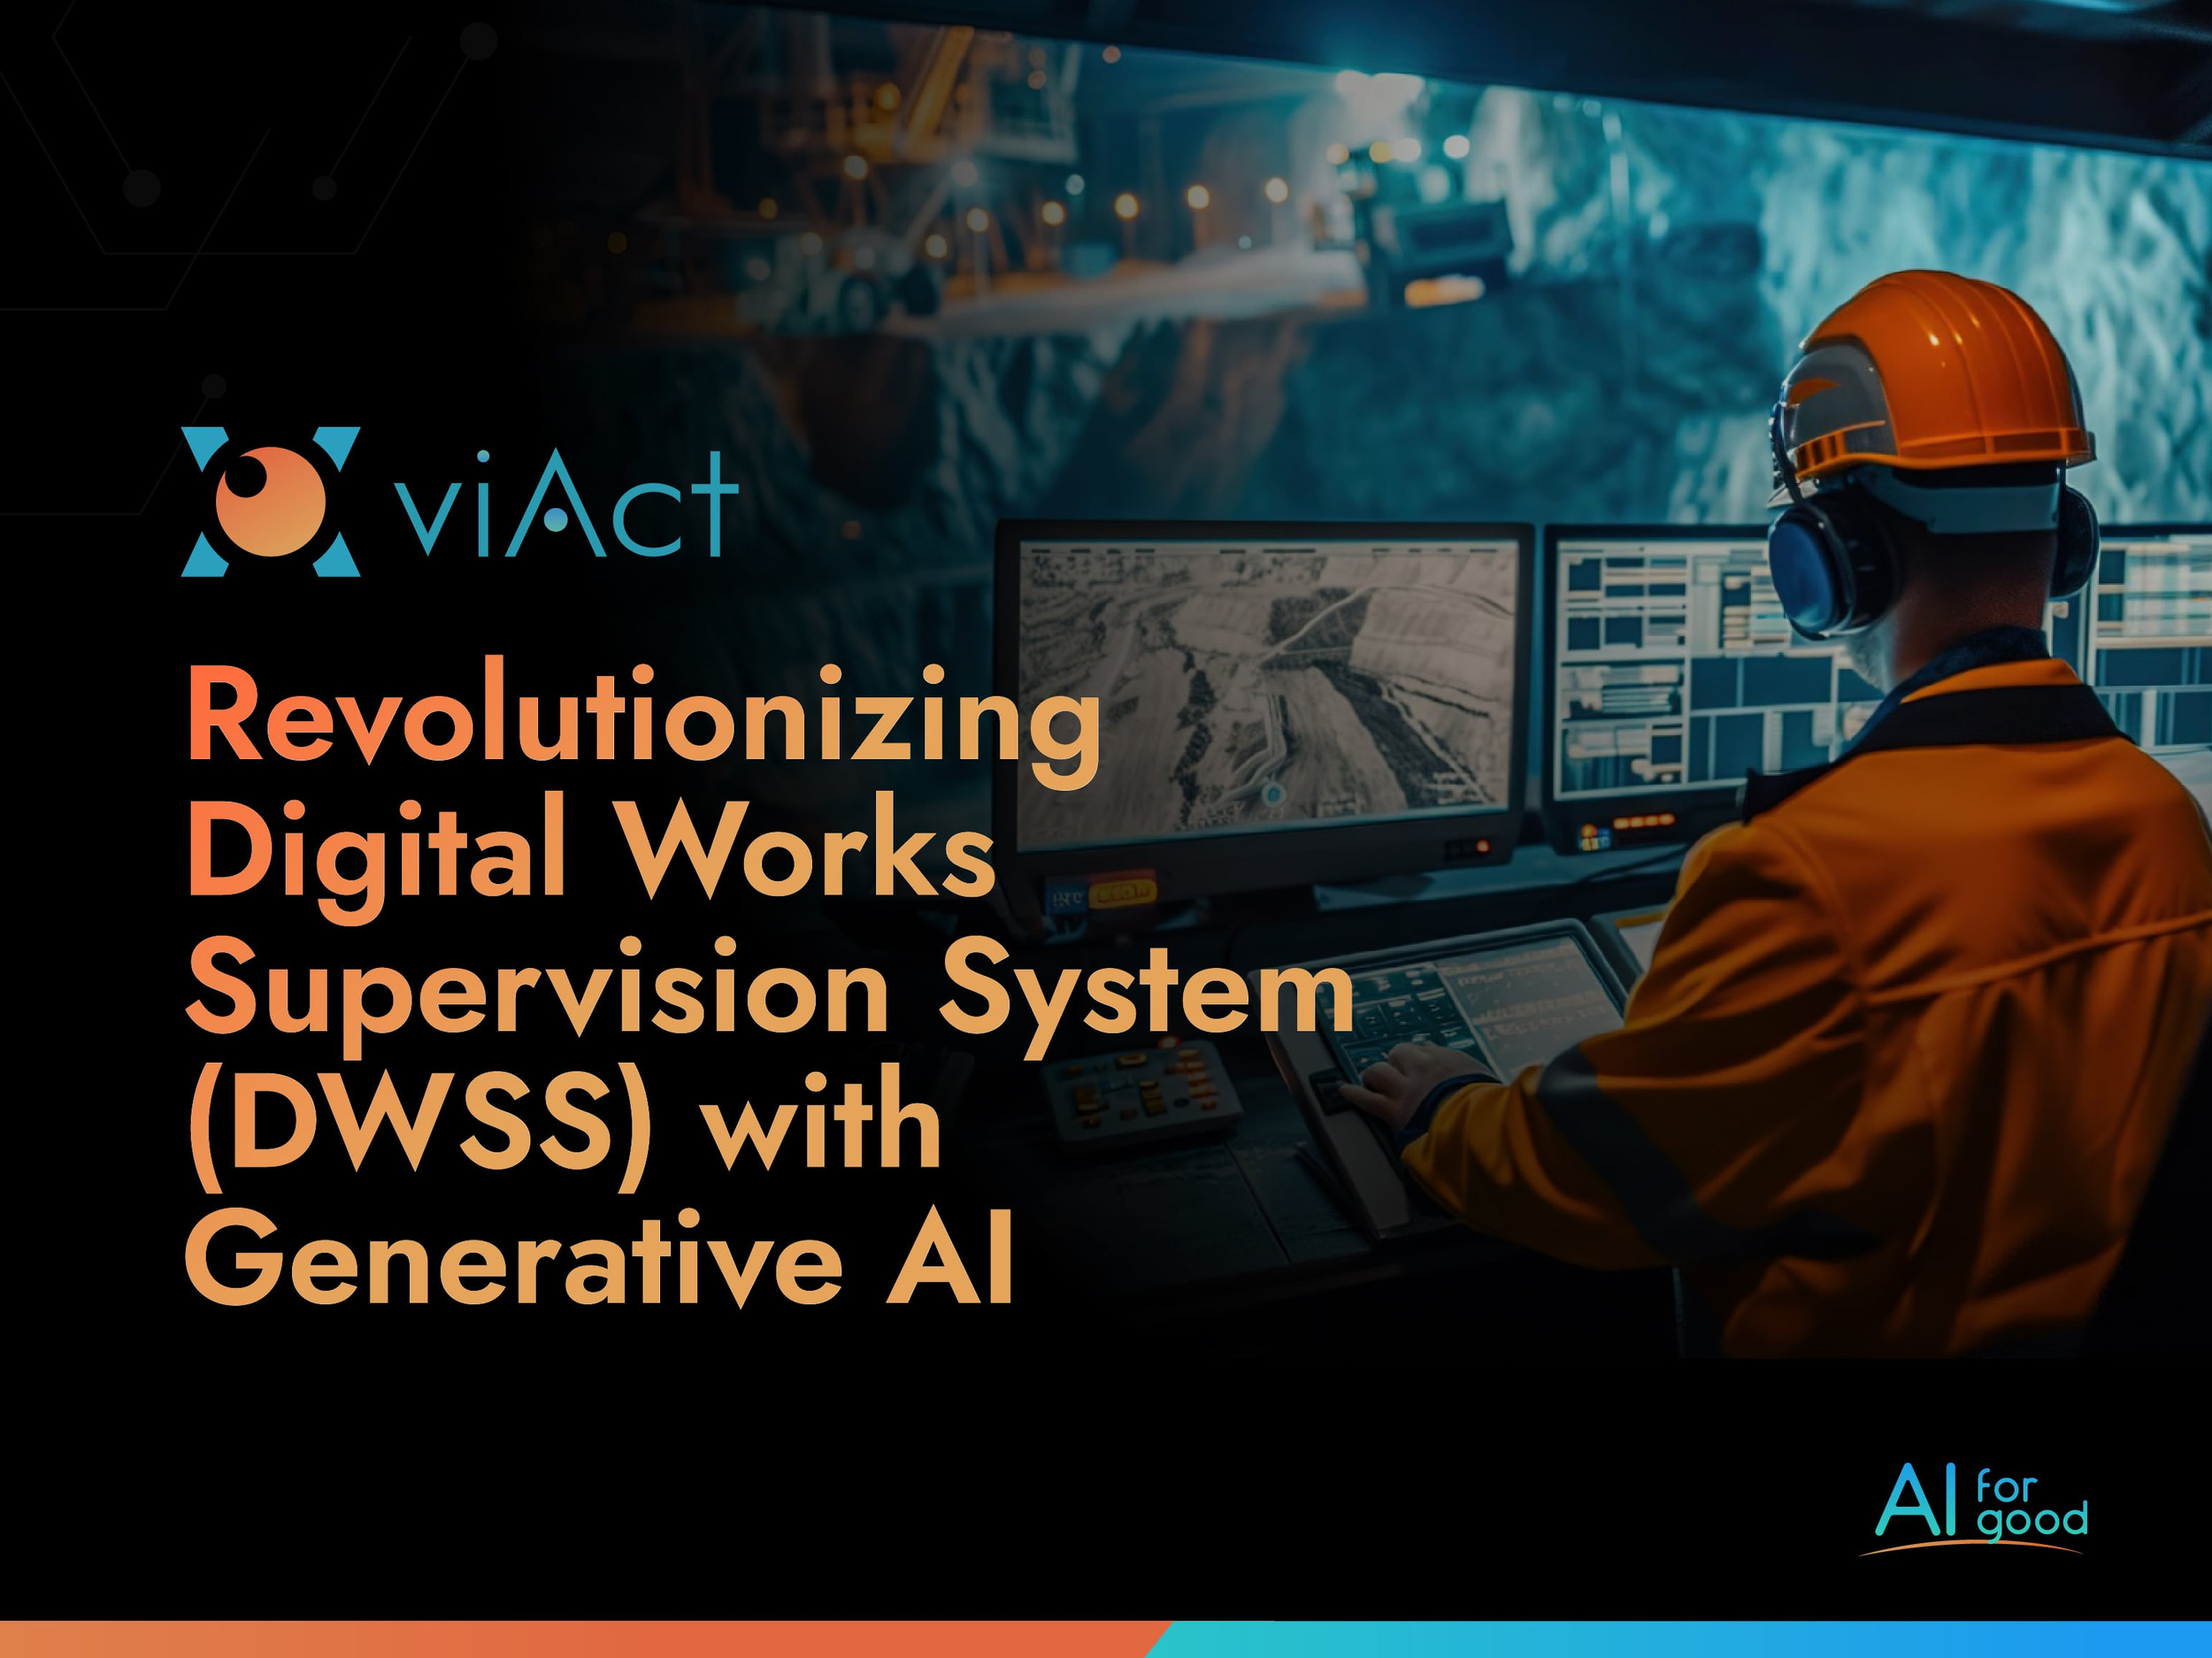 Revolutionizing Digital Works Supervision System (DWSS) with Generative AI